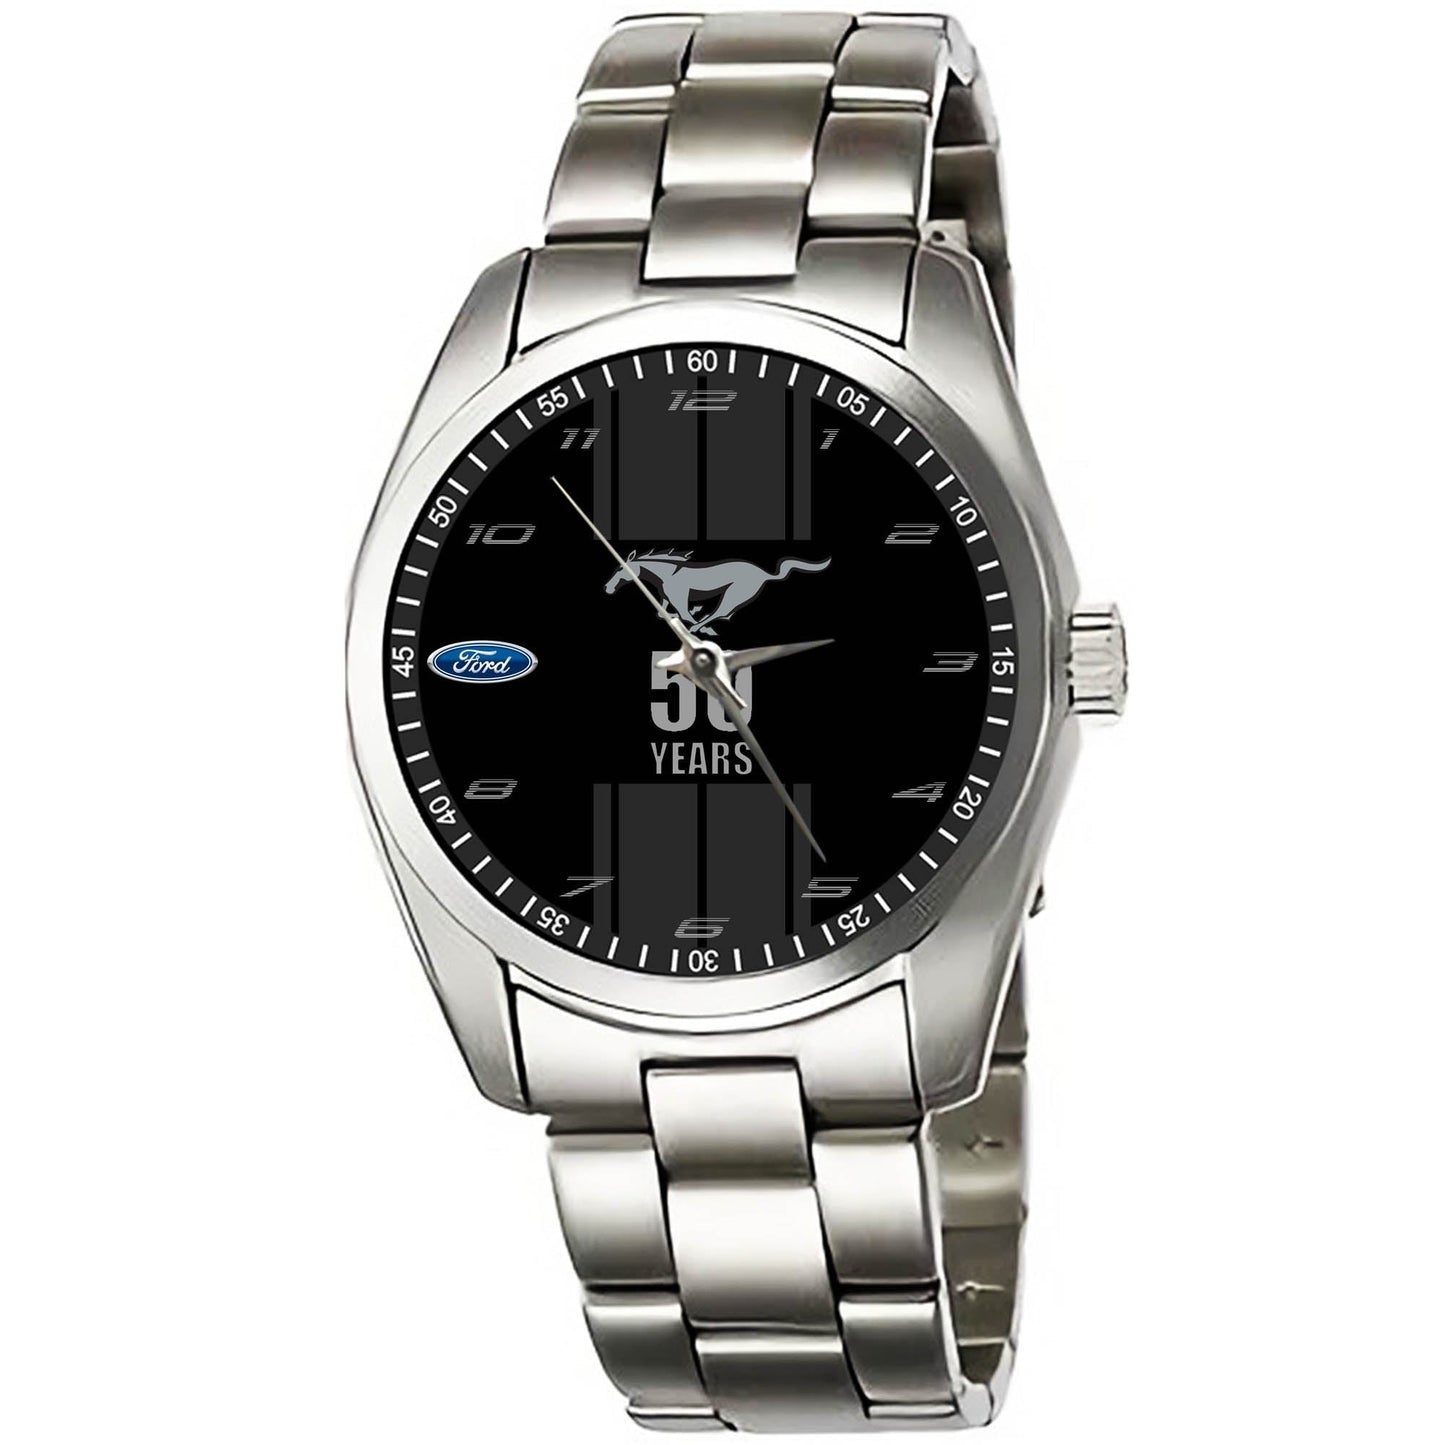 Ford Mustang 50th Anniversary Watches KP211